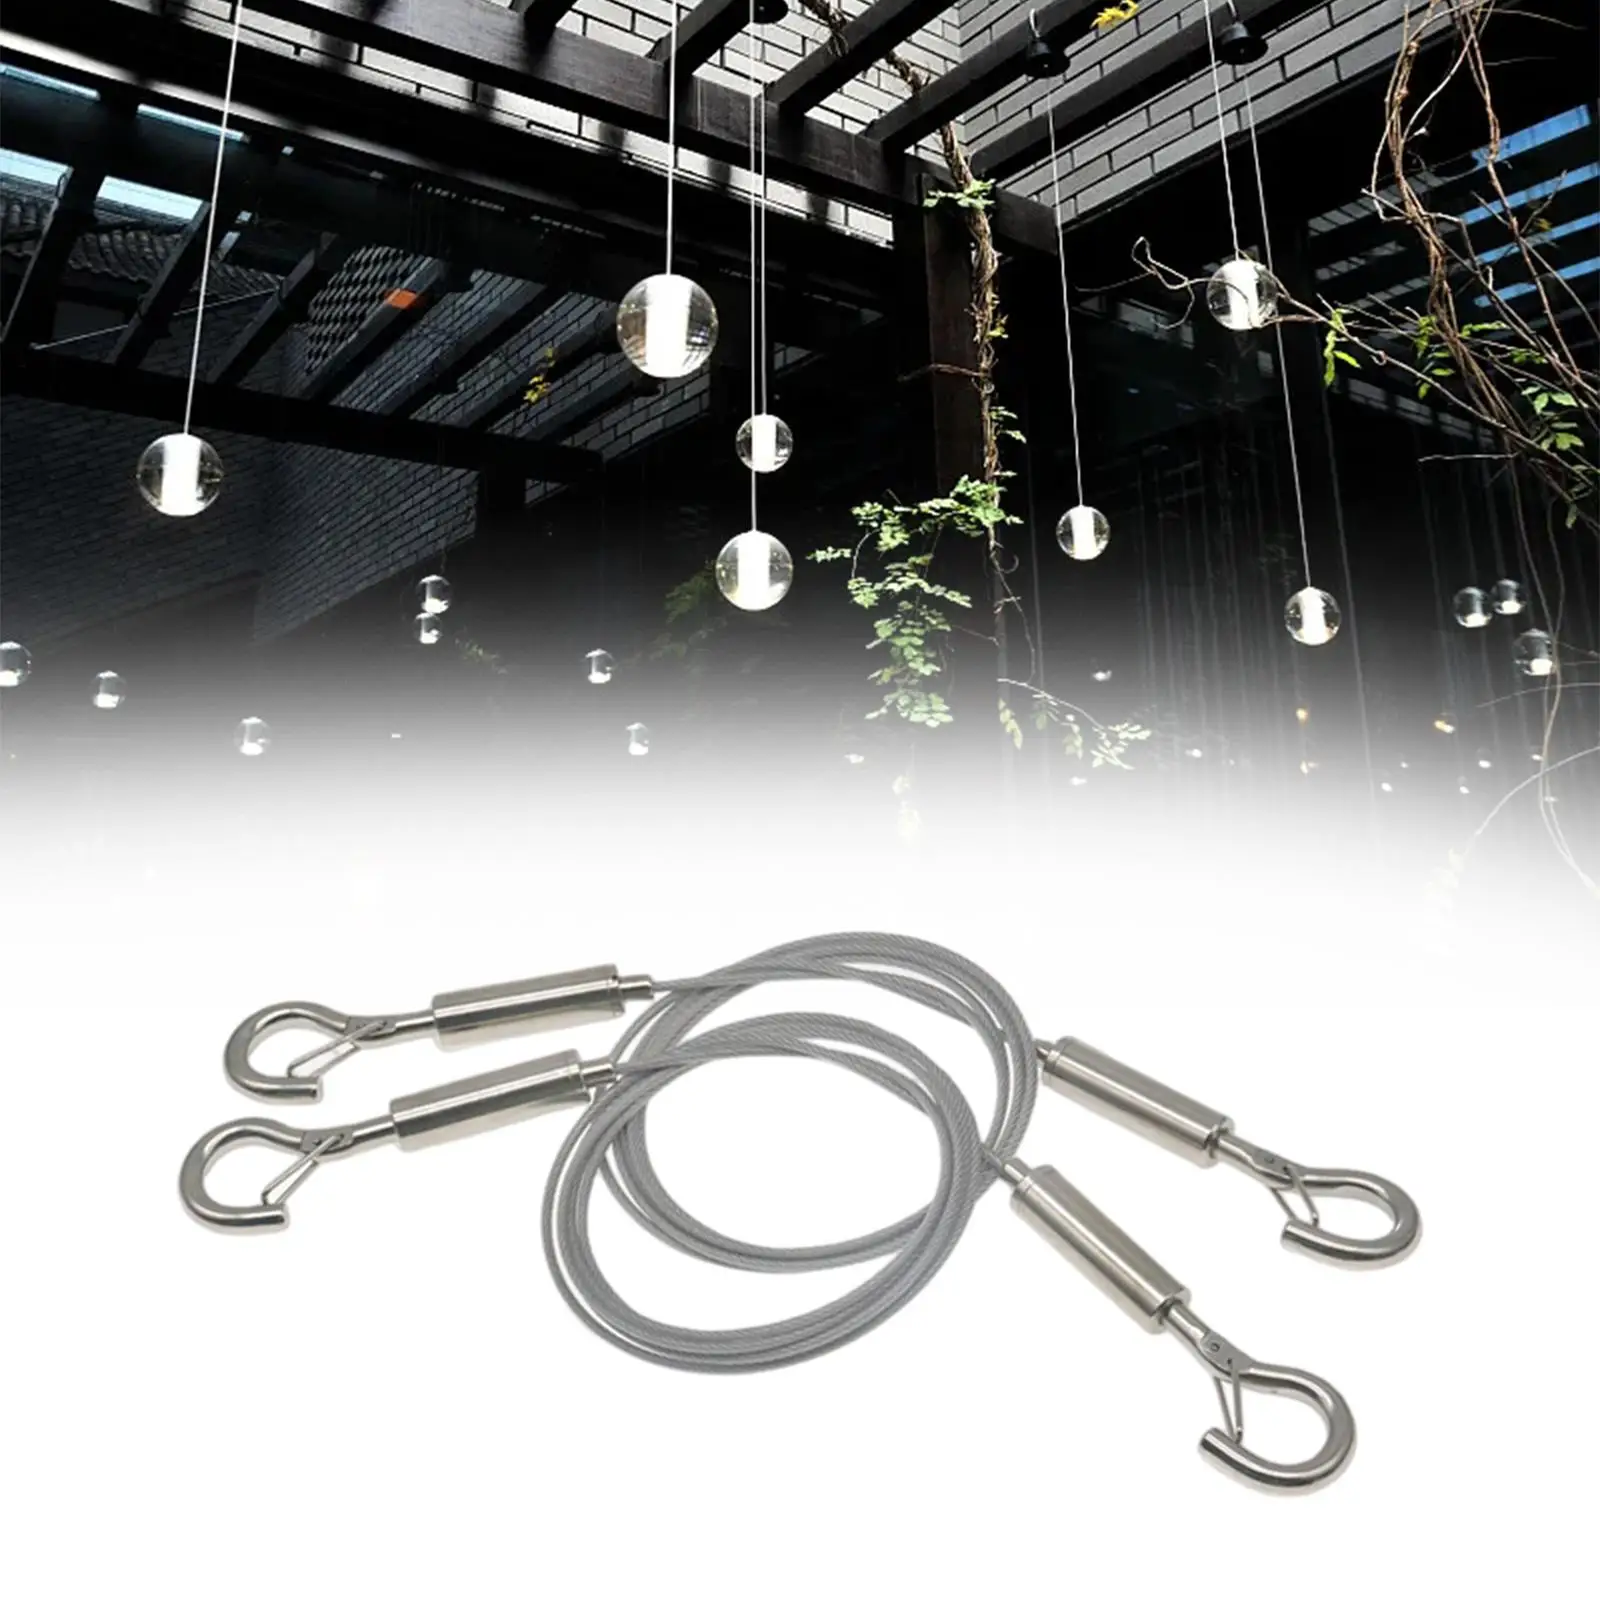 Heavy Duty Mirror Hanging Wire Suspension Kit Versatile Good Load Bearing Accessory Adjustable 6.56 Feet Long for Indoor Outdoor